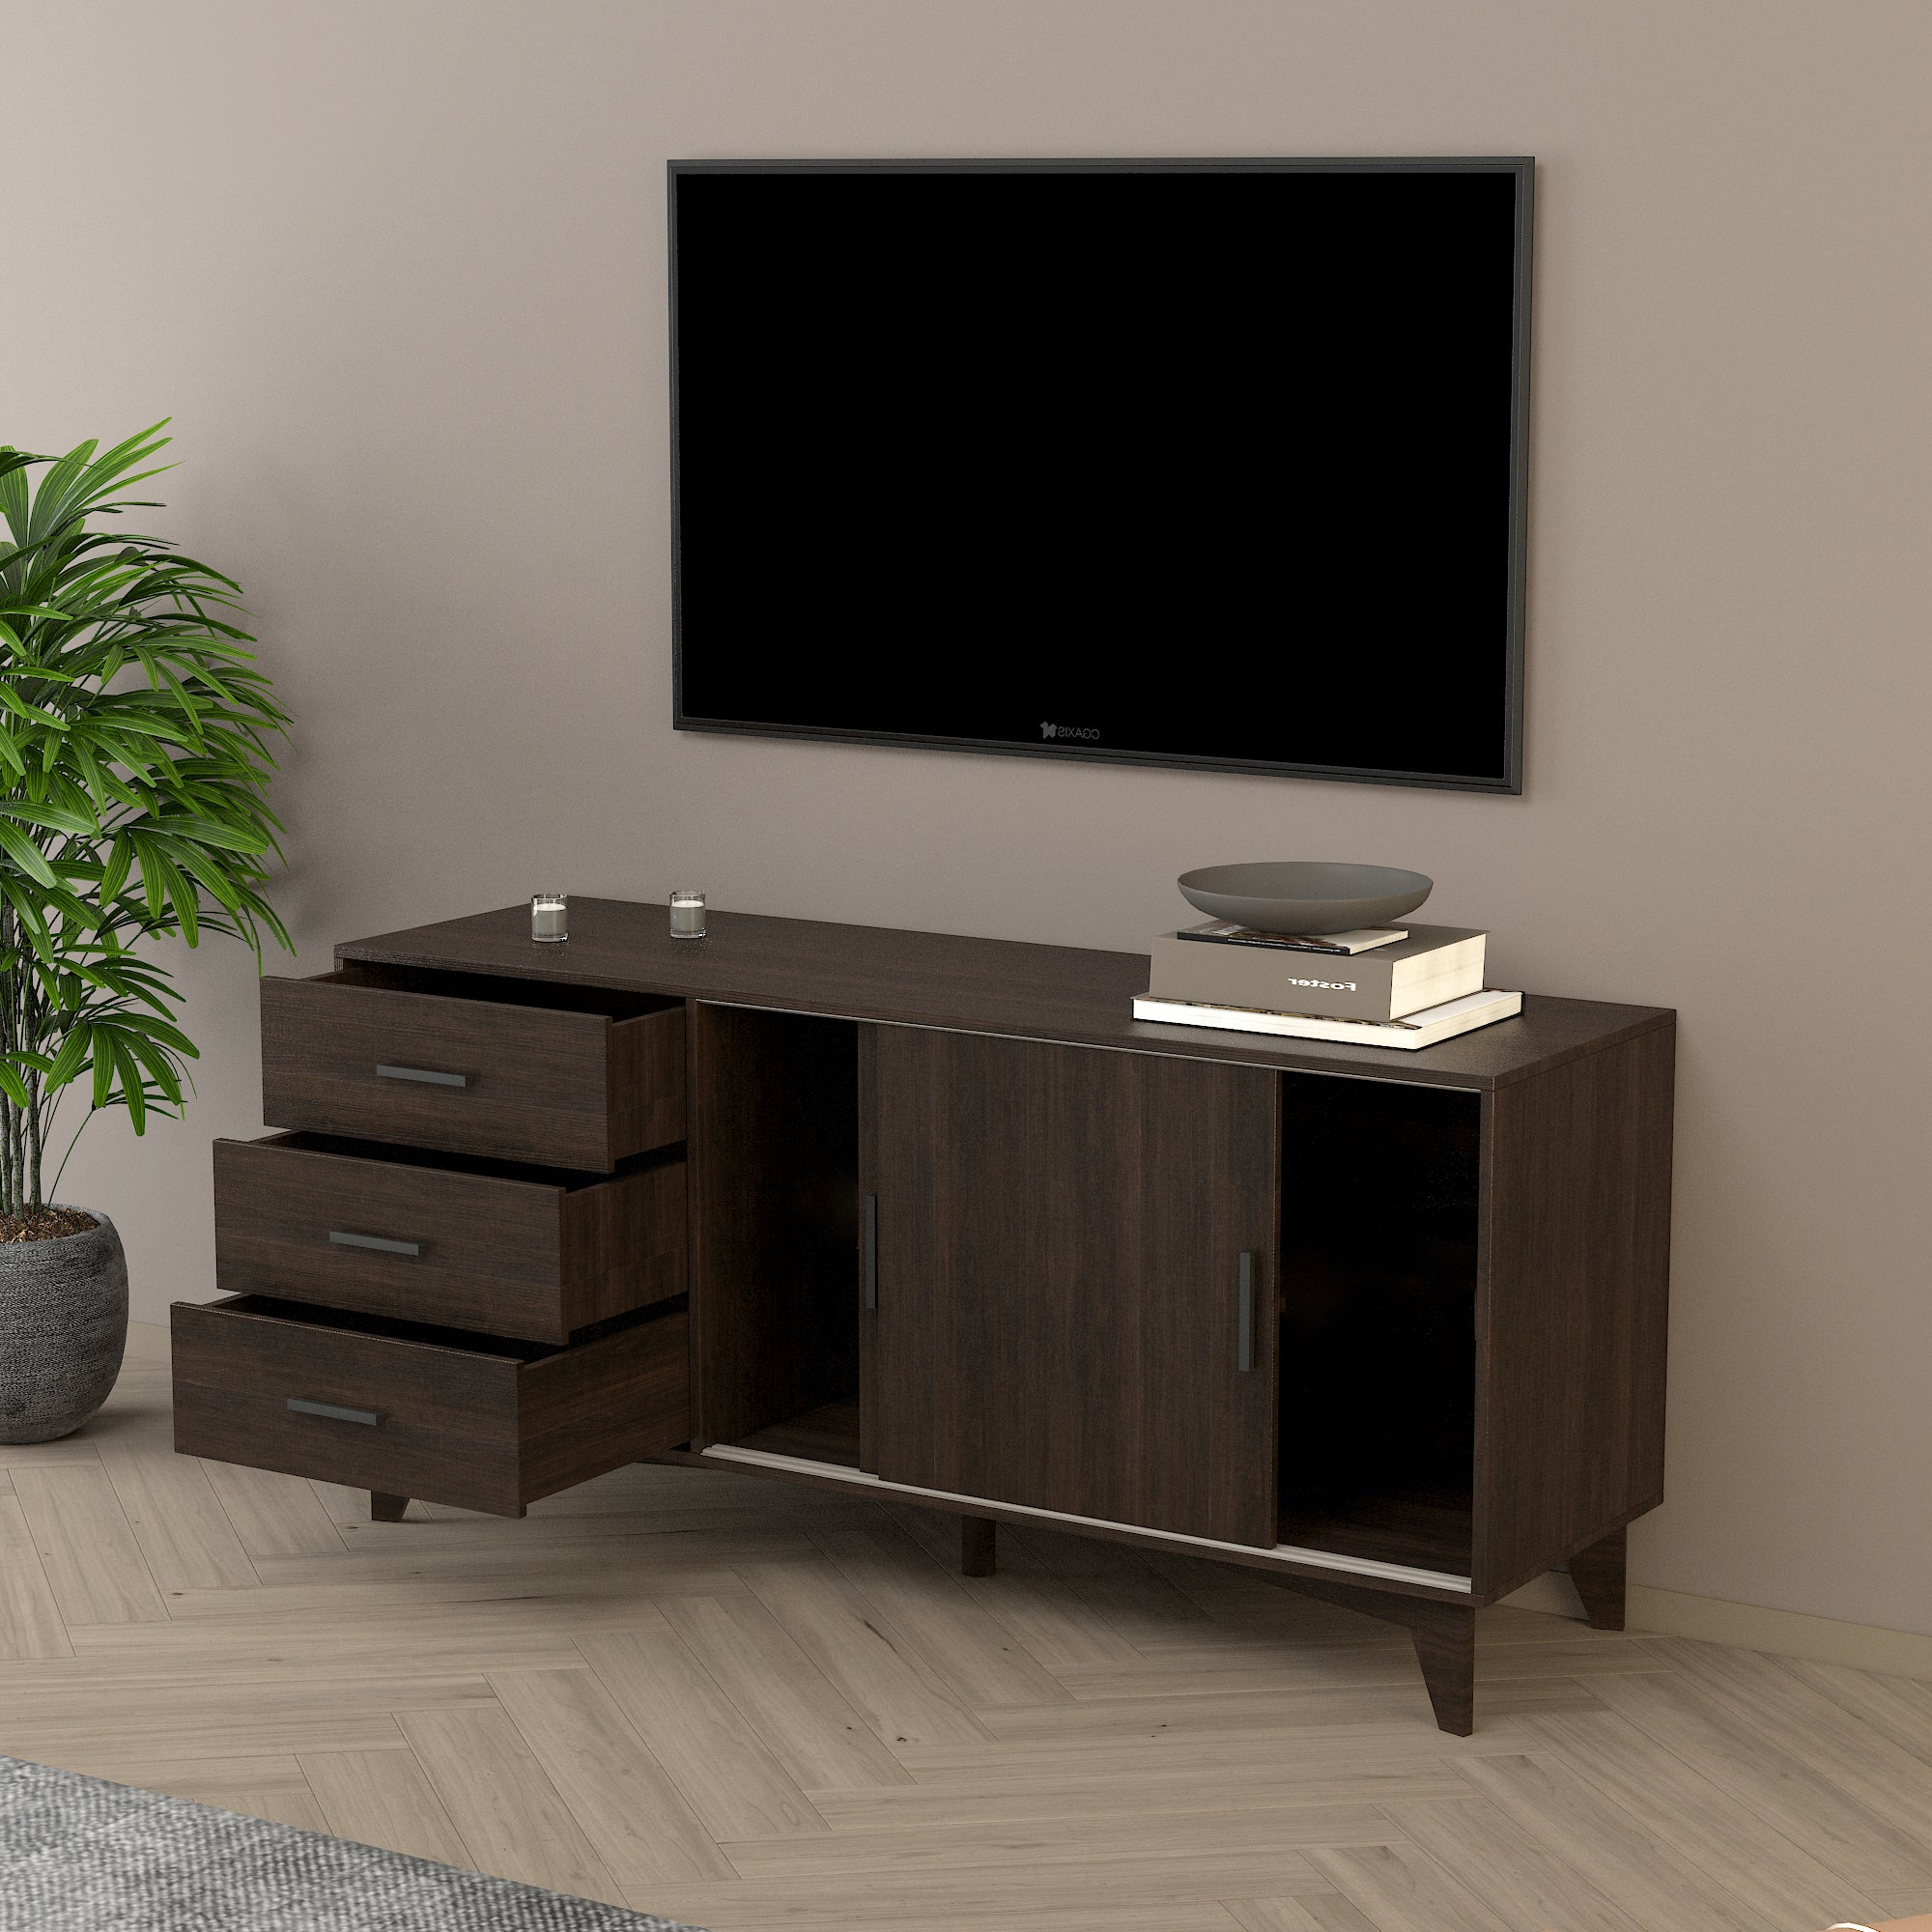 TV Stand with Sliding Doors and Drawers